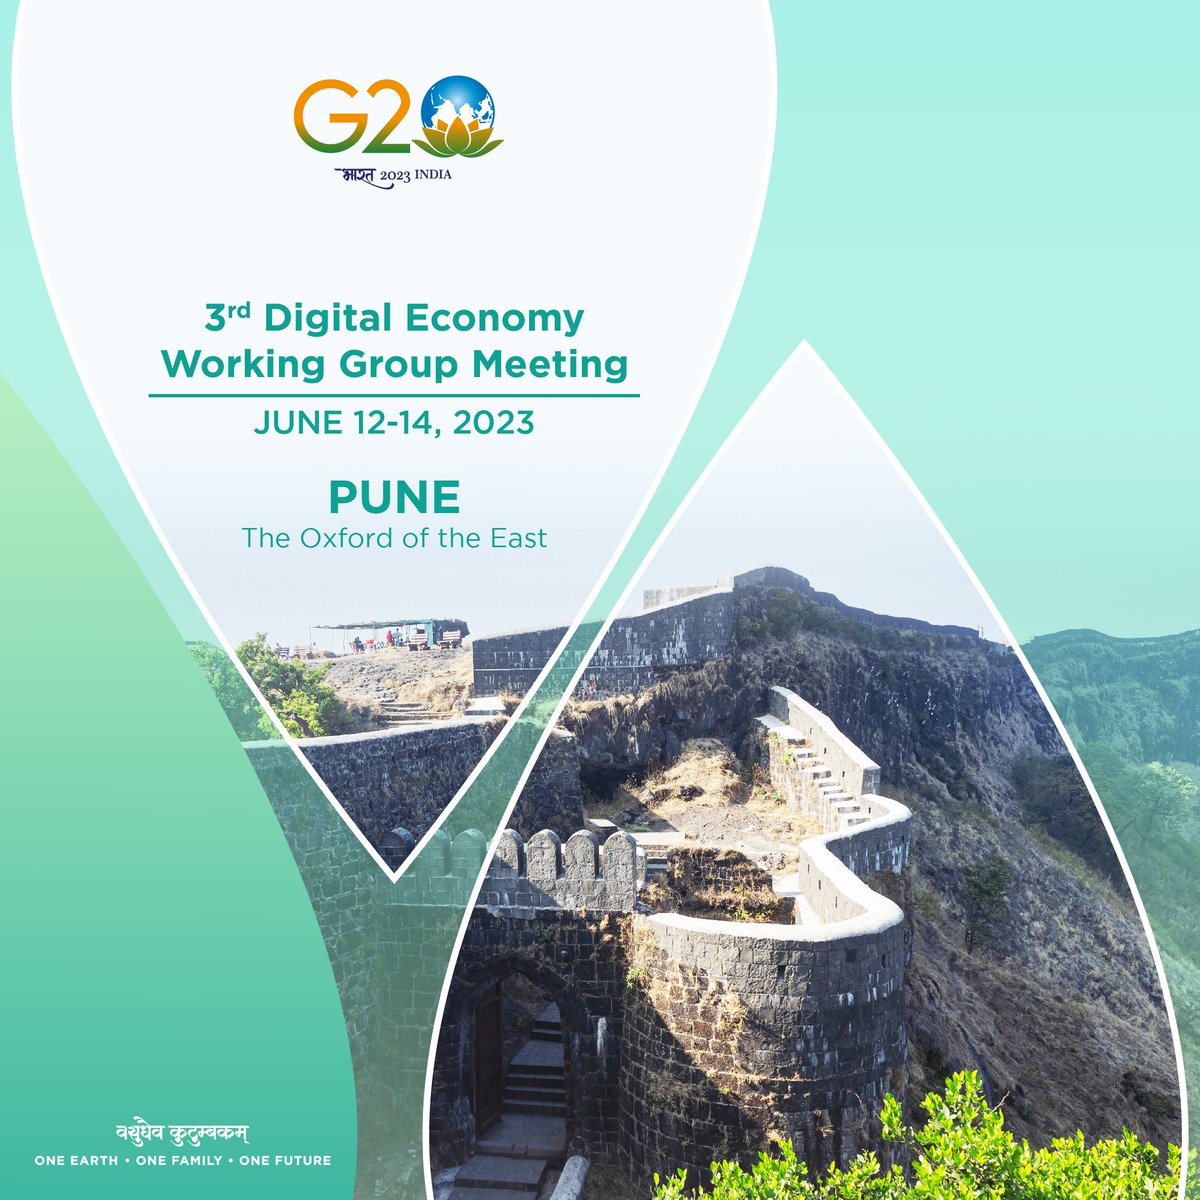 The vibrant city of #Pune is all geared up to host #G20India delegates for the 3⃣rd #G20DEWG Meet! 

Discussions aim to further Priority Areas of the Working Group & accelerate digital transformation while achieving inclusive social & economic growth.

🗓️ June 12-14